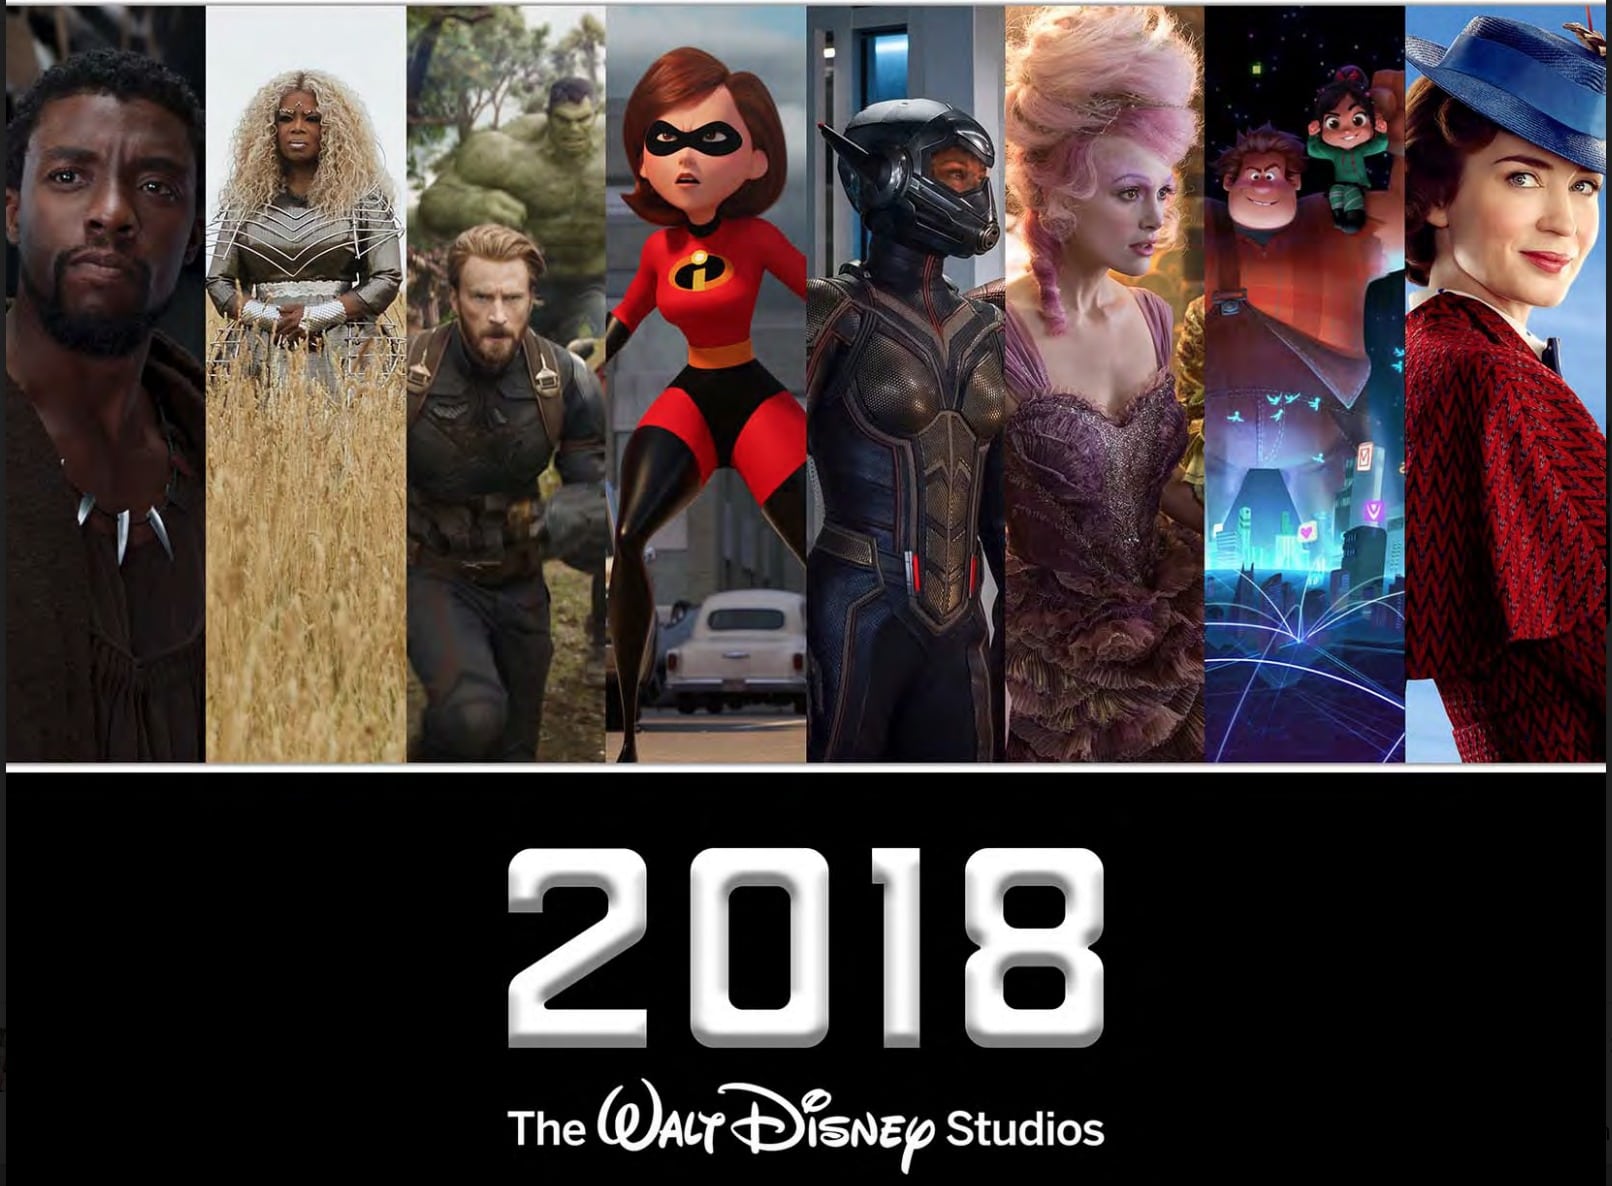 Disney Movies Coming Out In 2018 - simplytodaylife.com